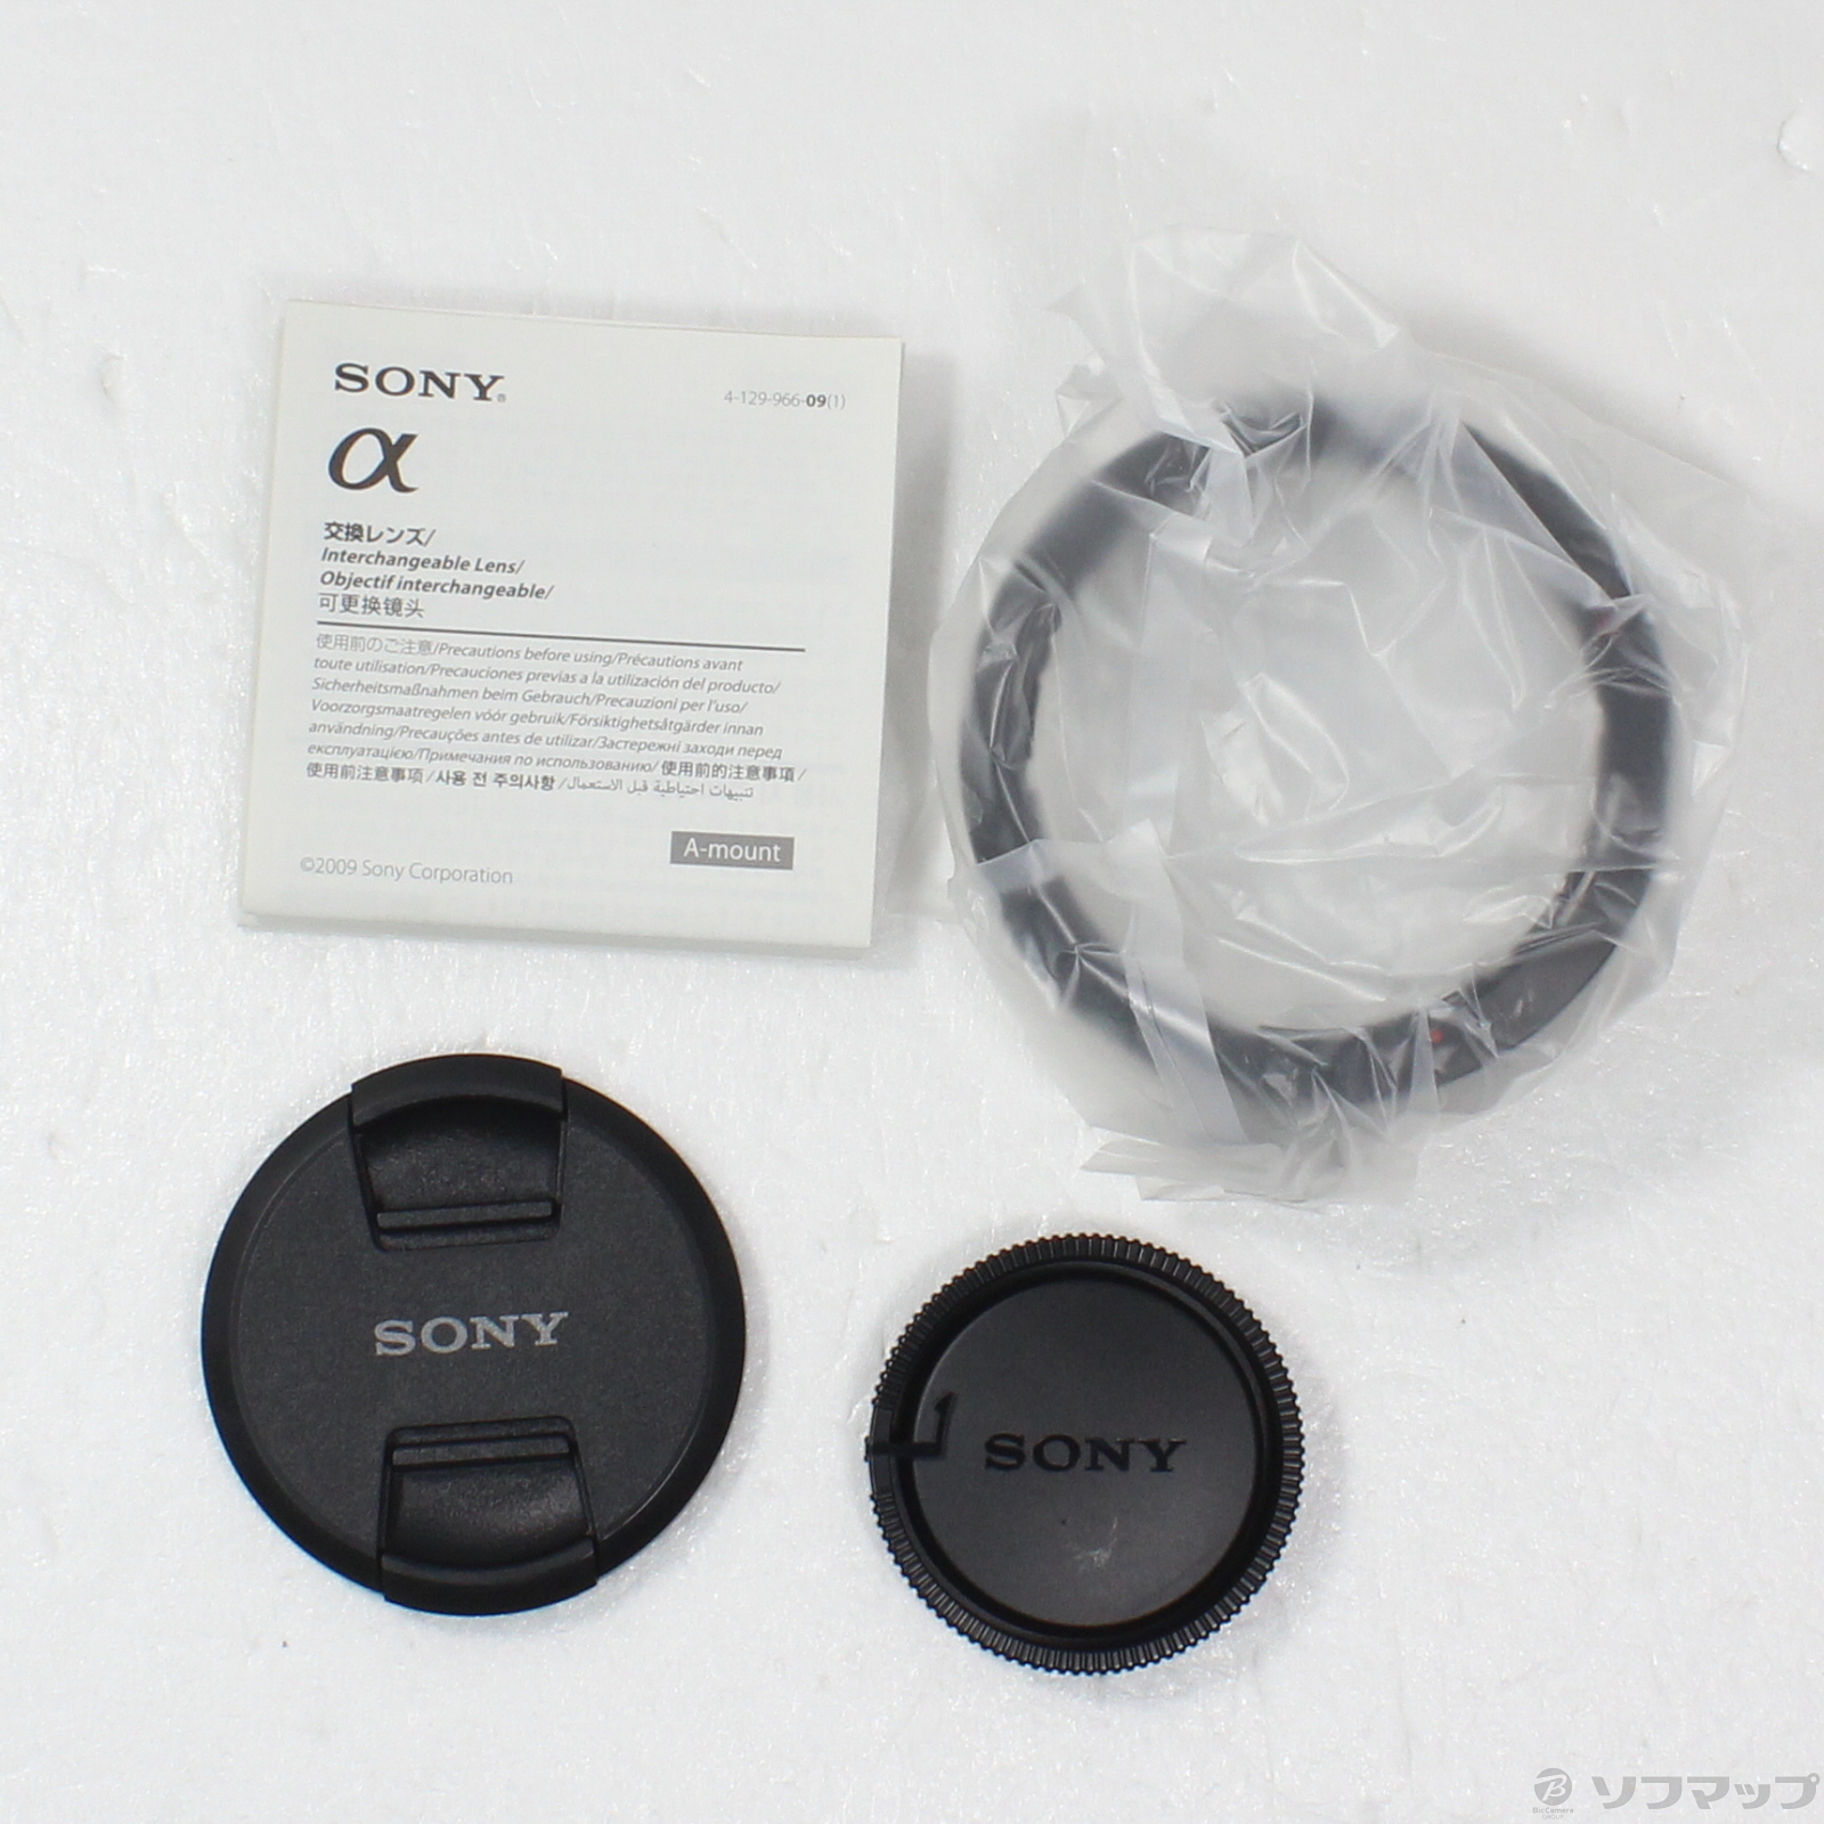 SONY ソニー DT 11-18mm F4.5-5.6 SAL1118 α A-